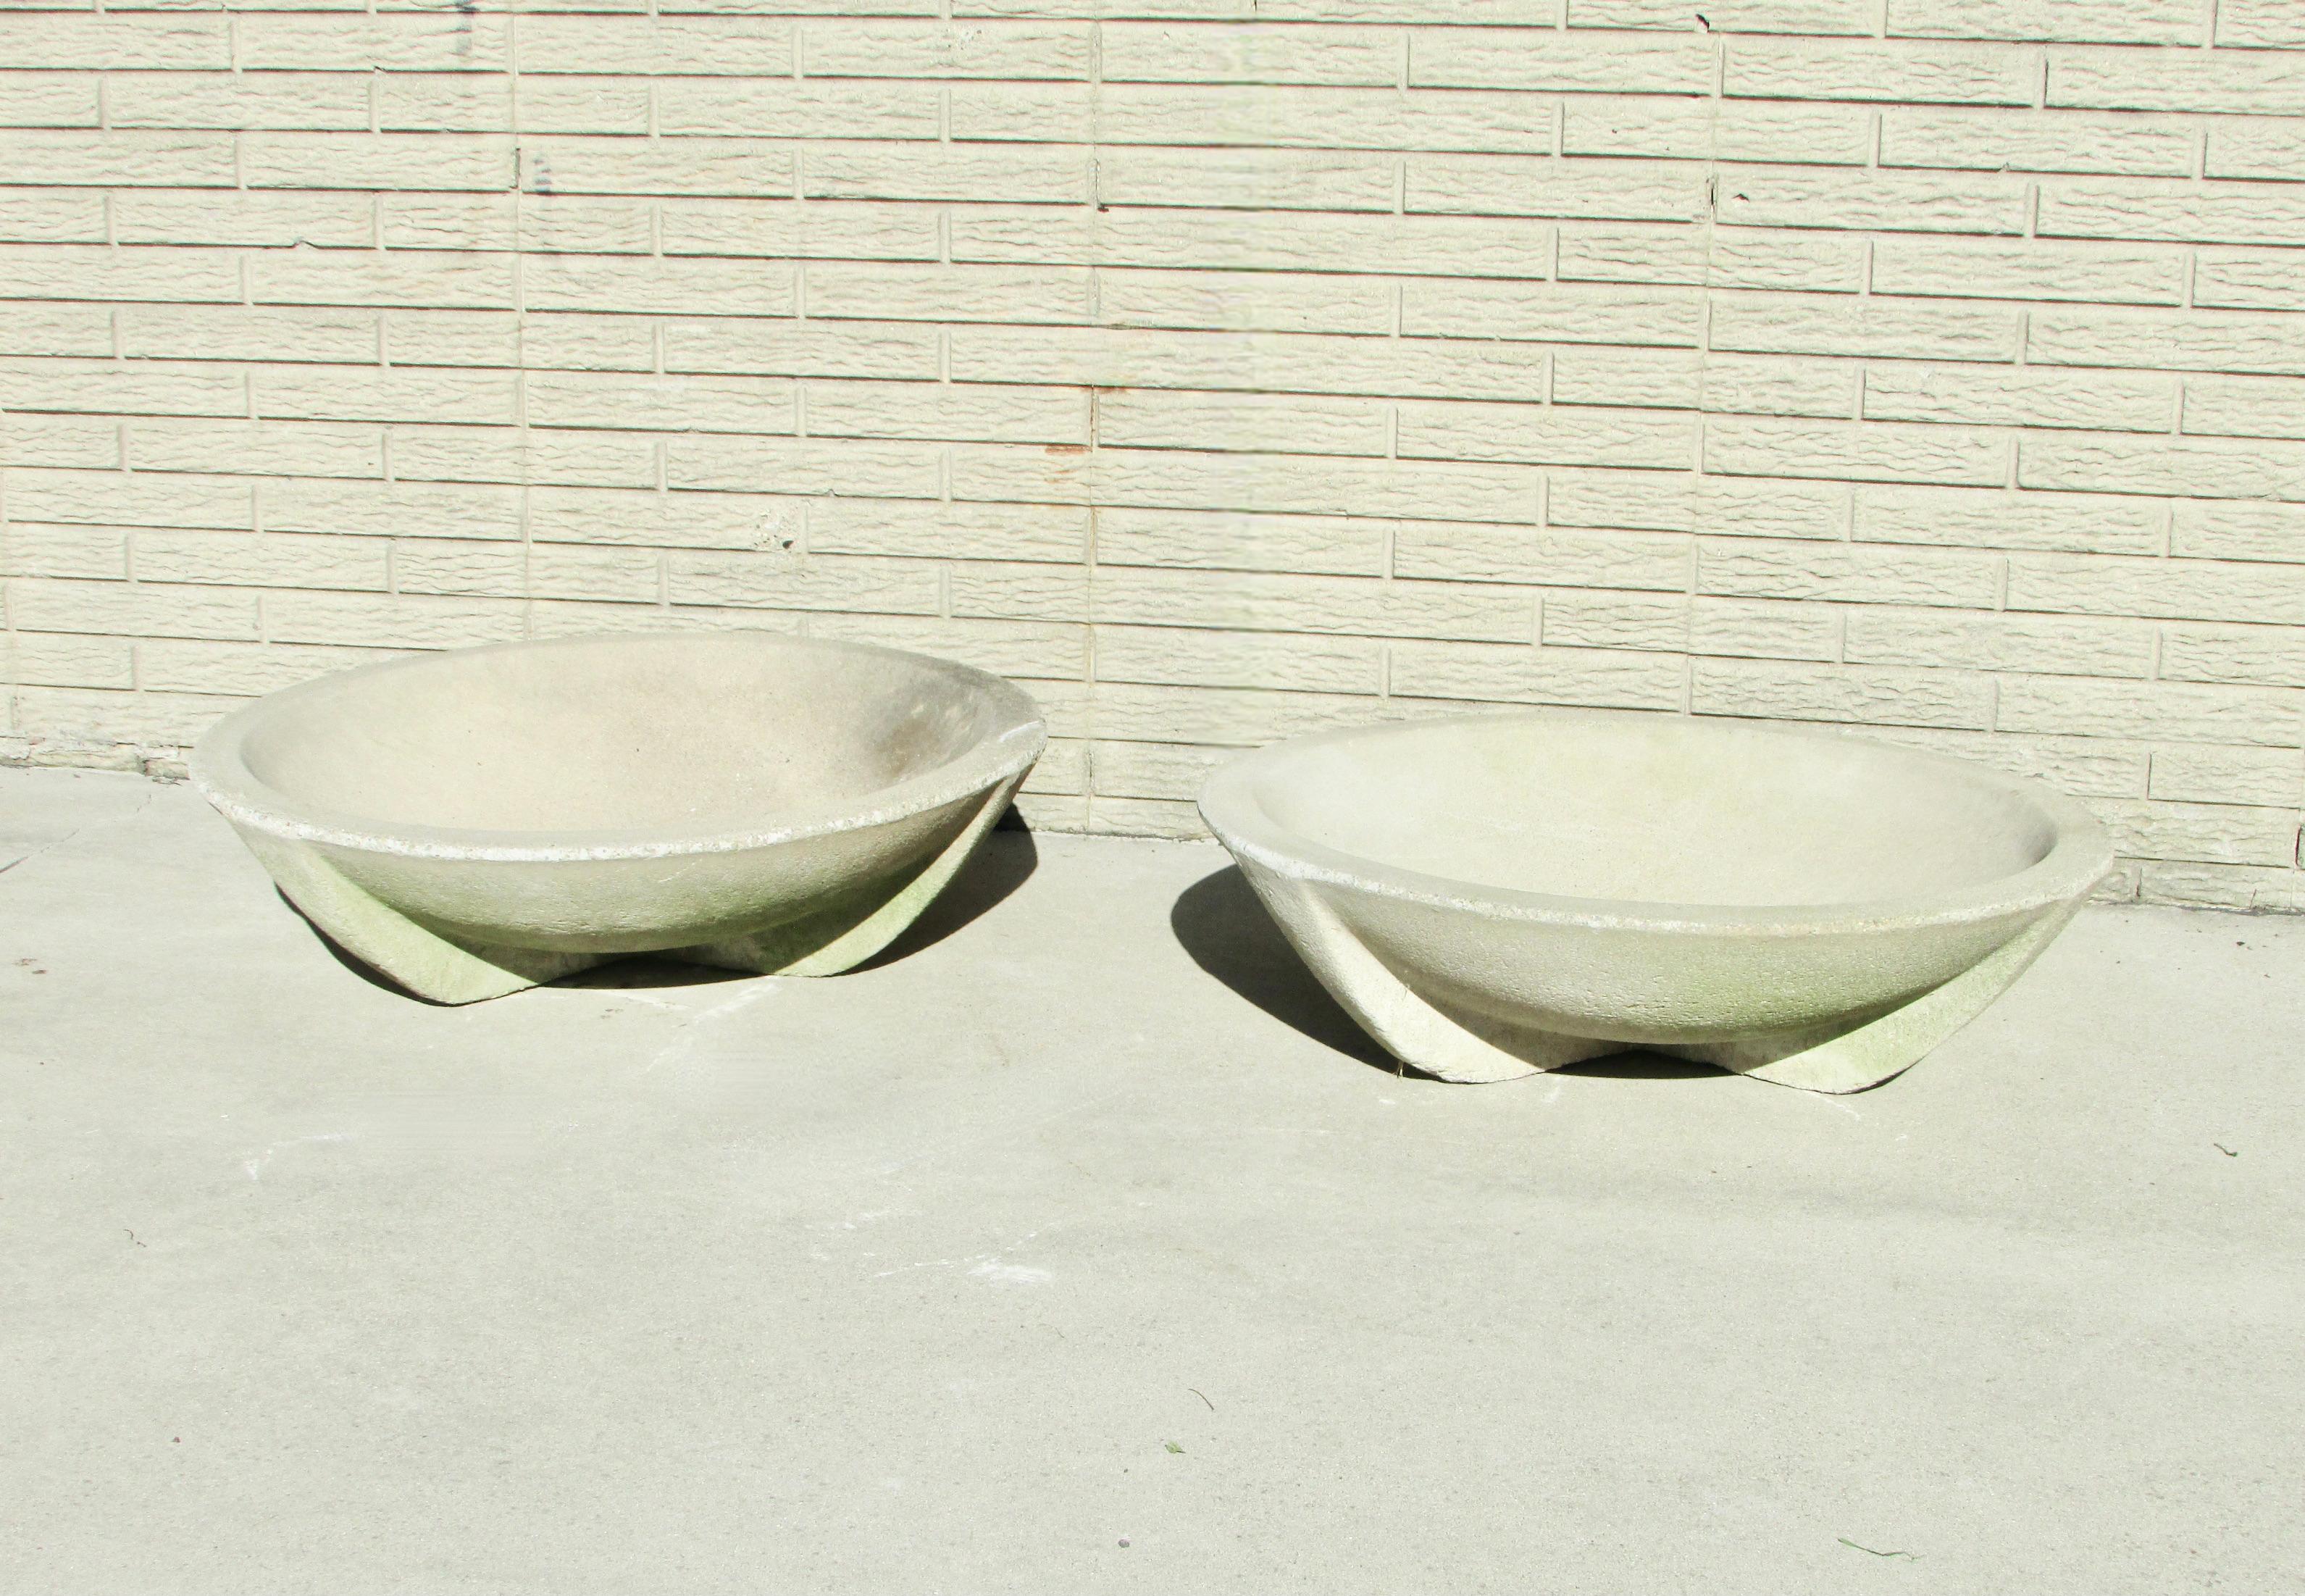 Frank Lloyd Wright Style Arts and Crafts Prairie School Cement Planter Pots In Good Condition For Sale In Ferndale, MI